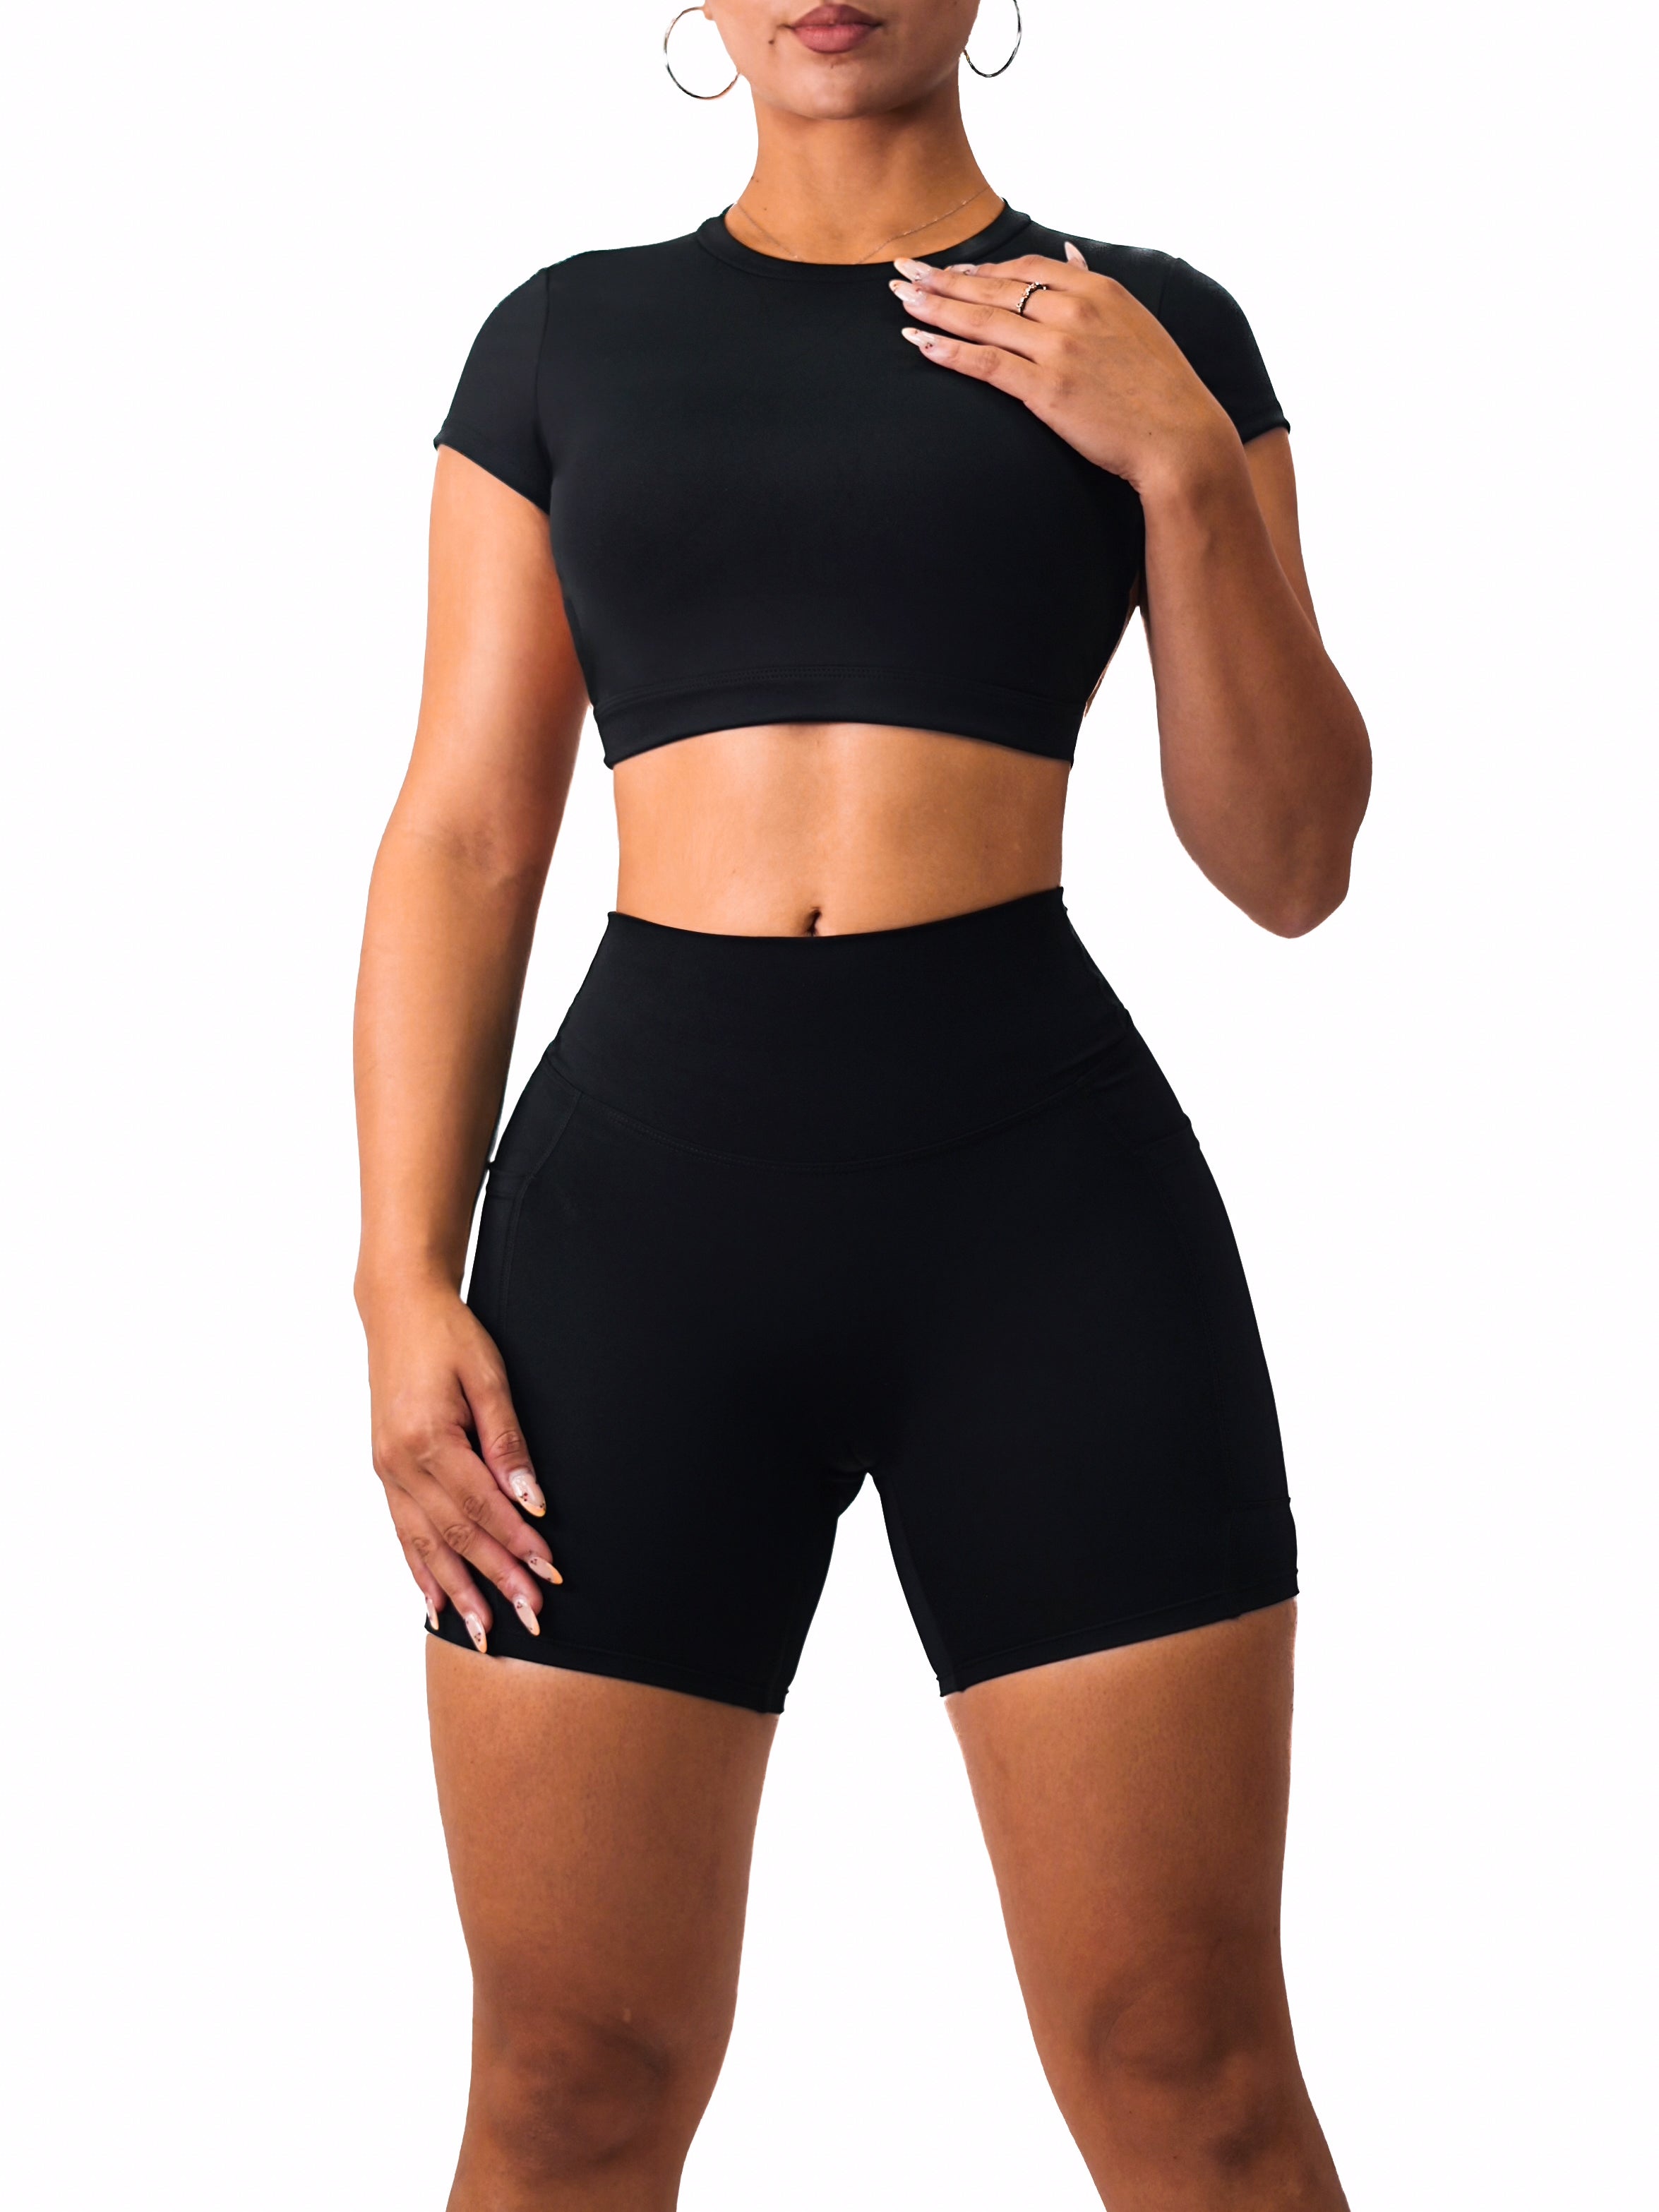 Backless Sports Top (Black)